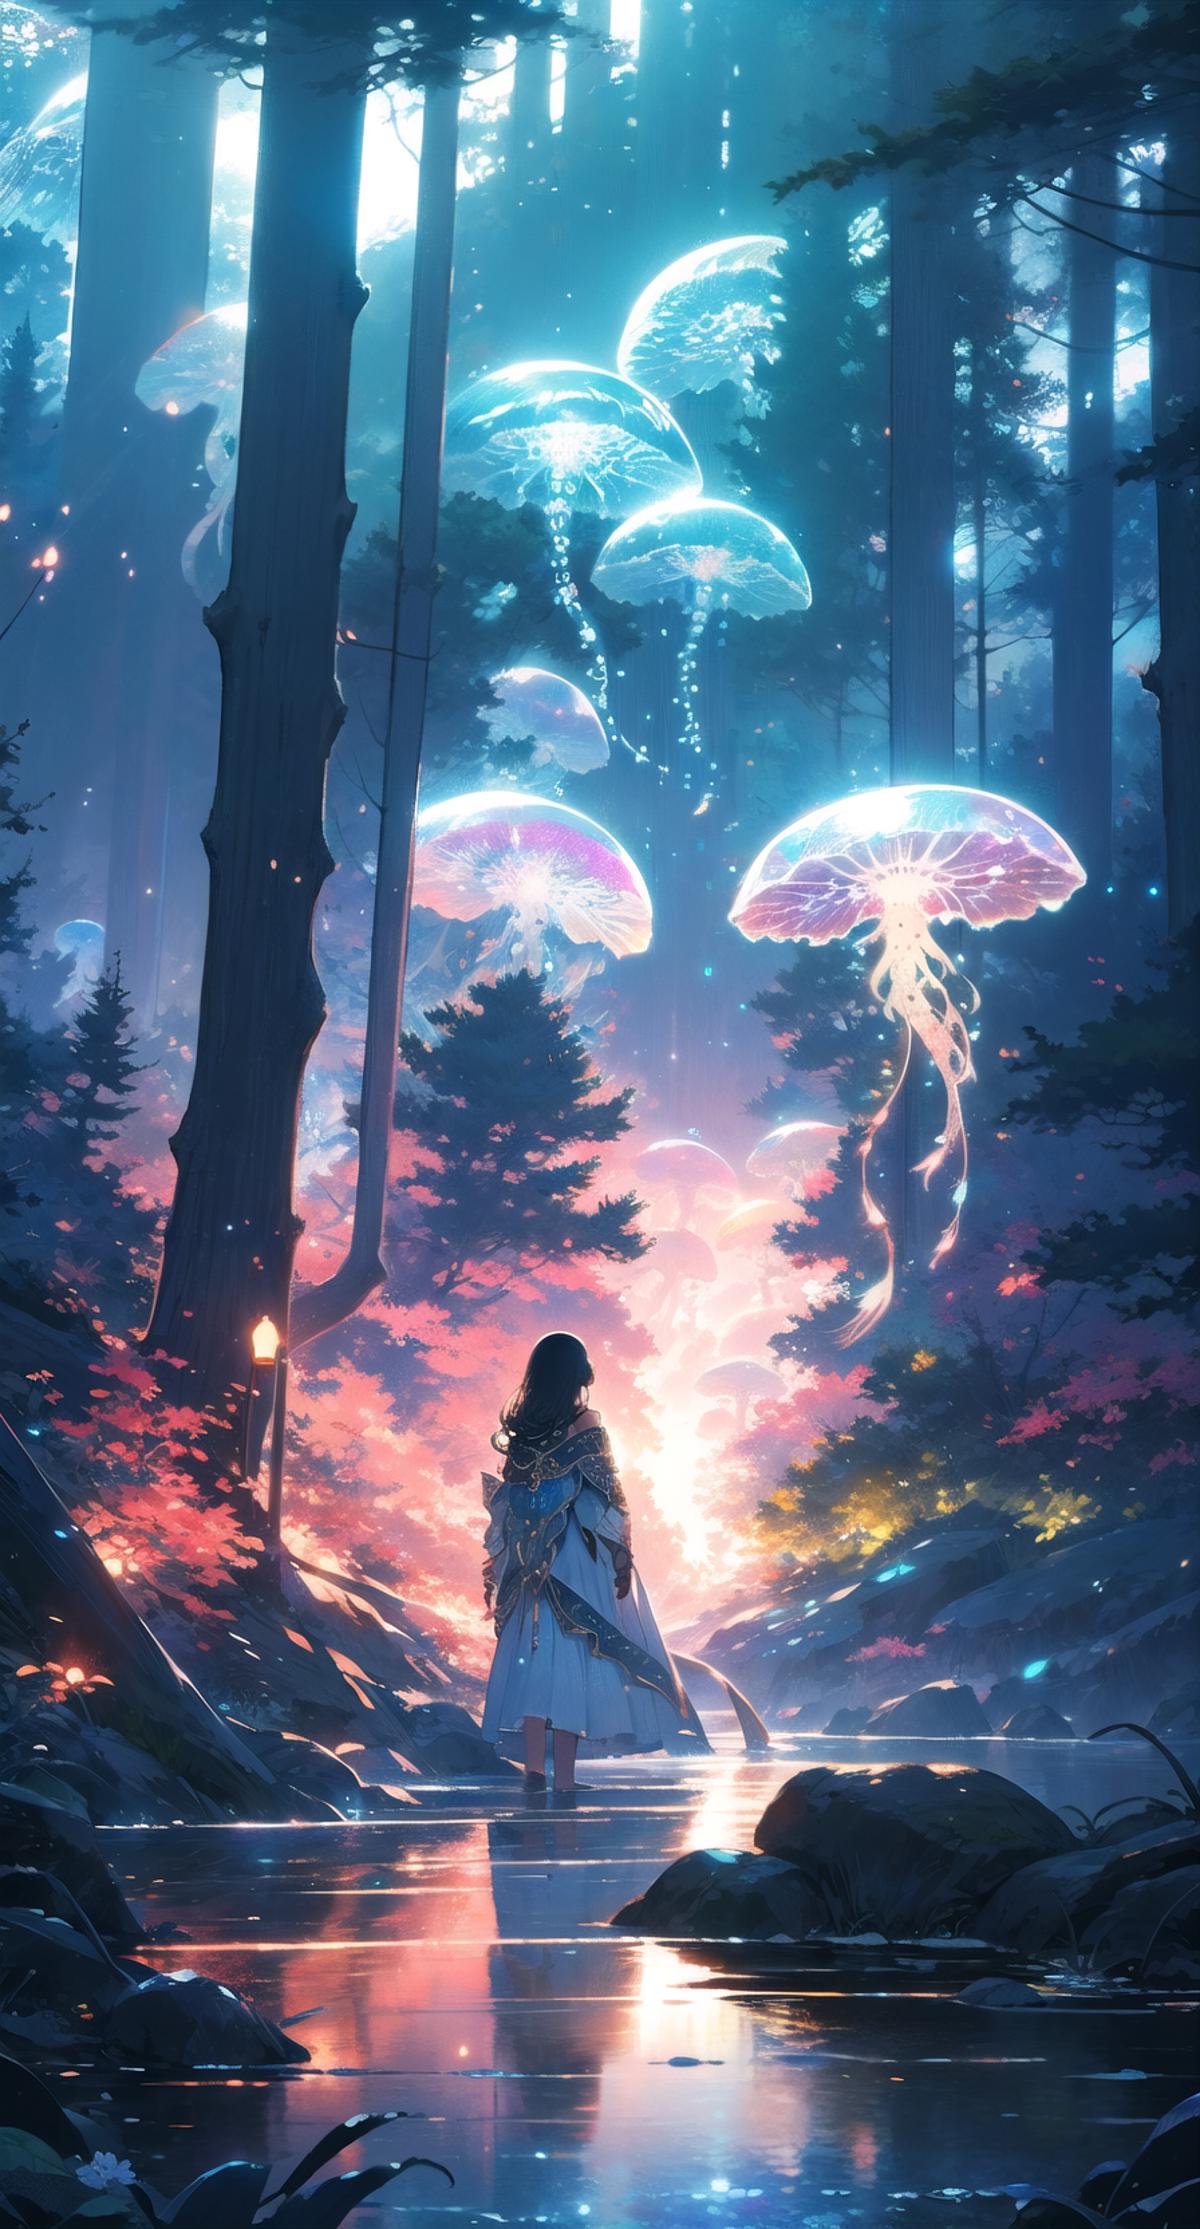 Fantasy artwork of a woman in a white dress standing among glowing jellyfish in a forest setting.